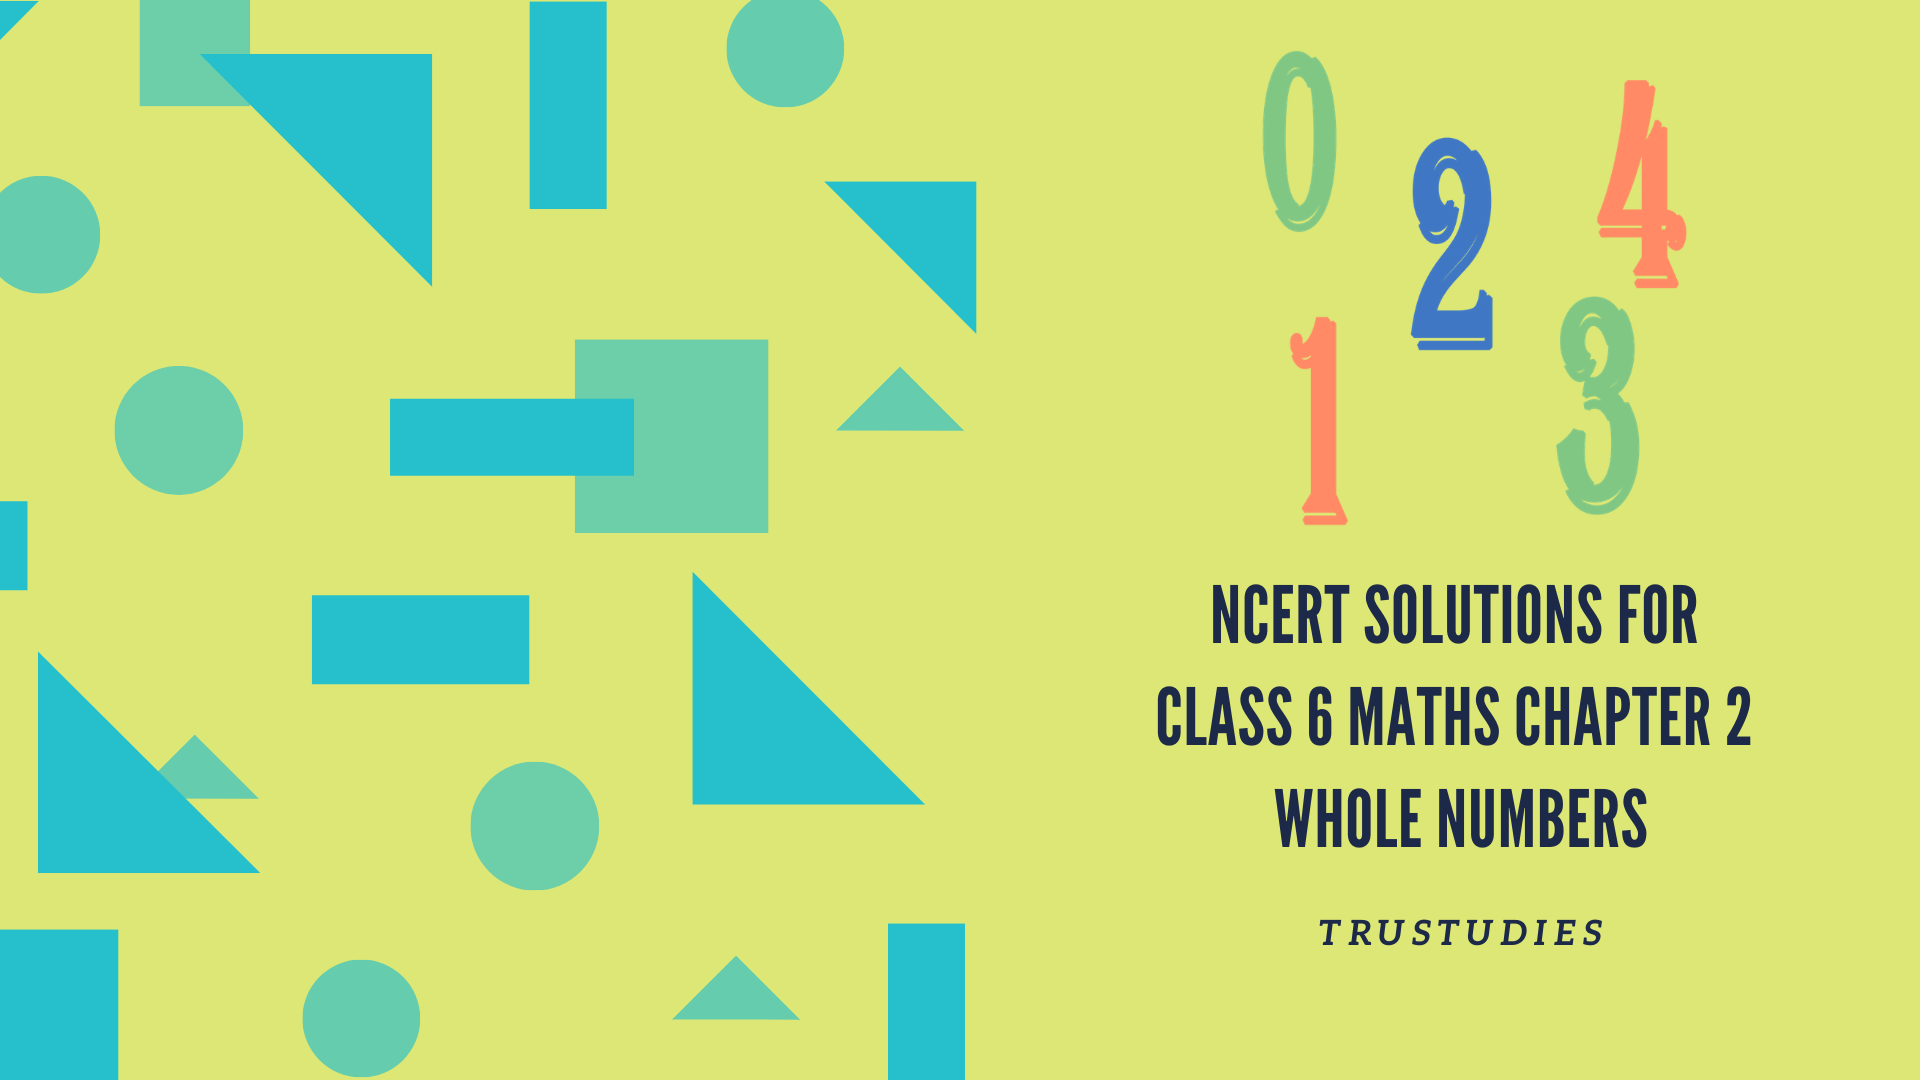 NCERT solutions for class 6 maths chapter 2 whole numbers banner image